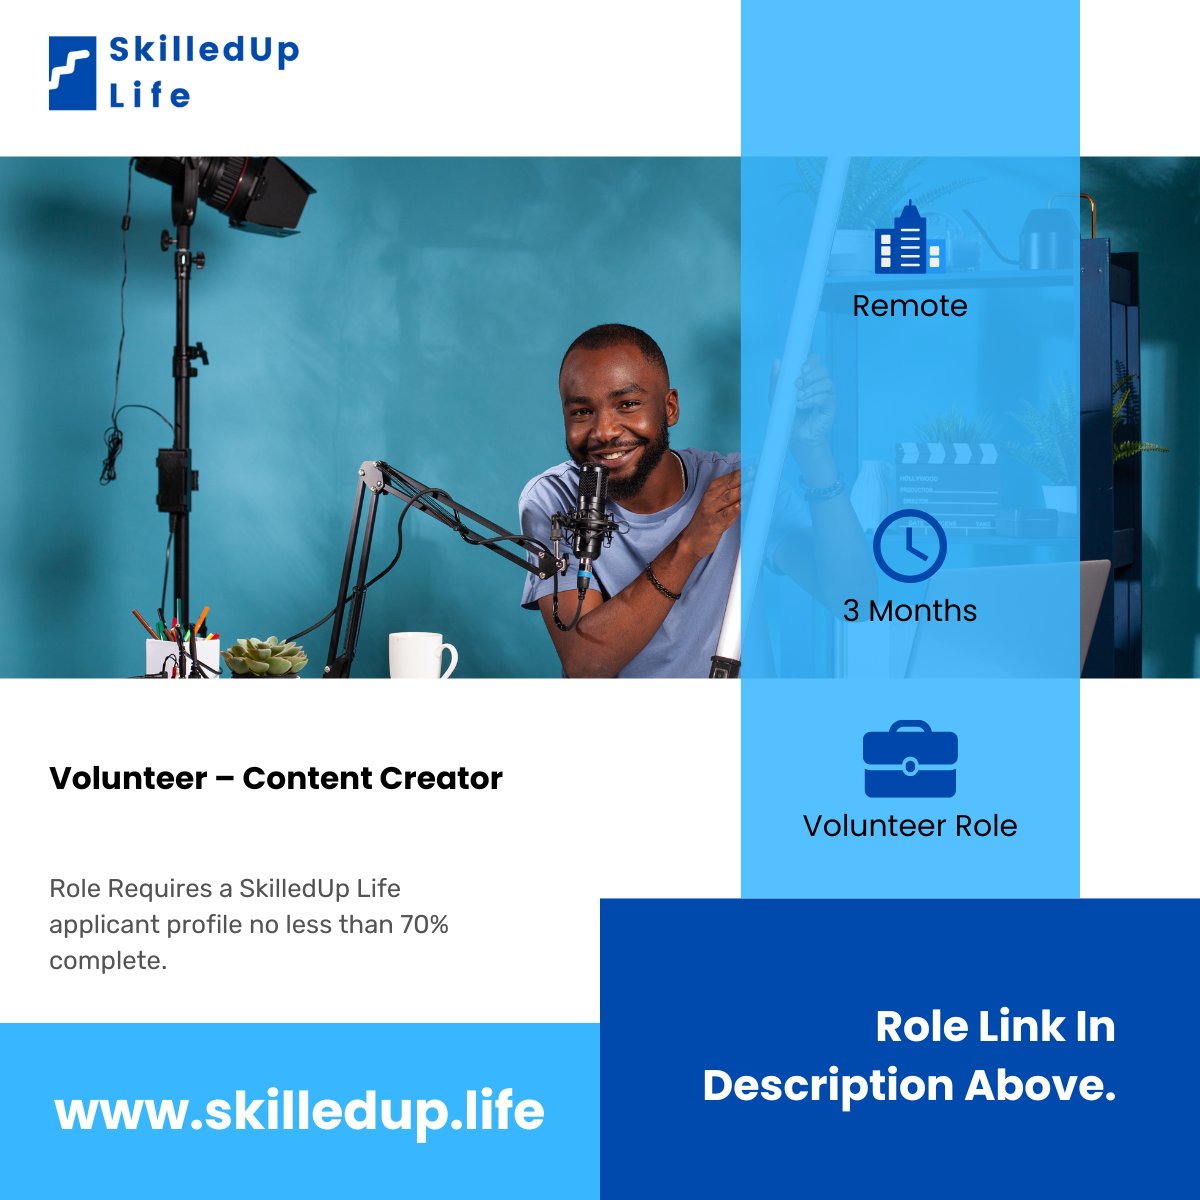 Ready to create compelling content? ✍️ Join Addressless Mailing Ltd. (t/a Dustid) as a Volunteer Content Creator and shape stories that inspire. Check out the opportunity via this link skilledup.life/opportunity/ad…
#ContentCreation
#VolunteerOpportunity
#SkilledUpLife